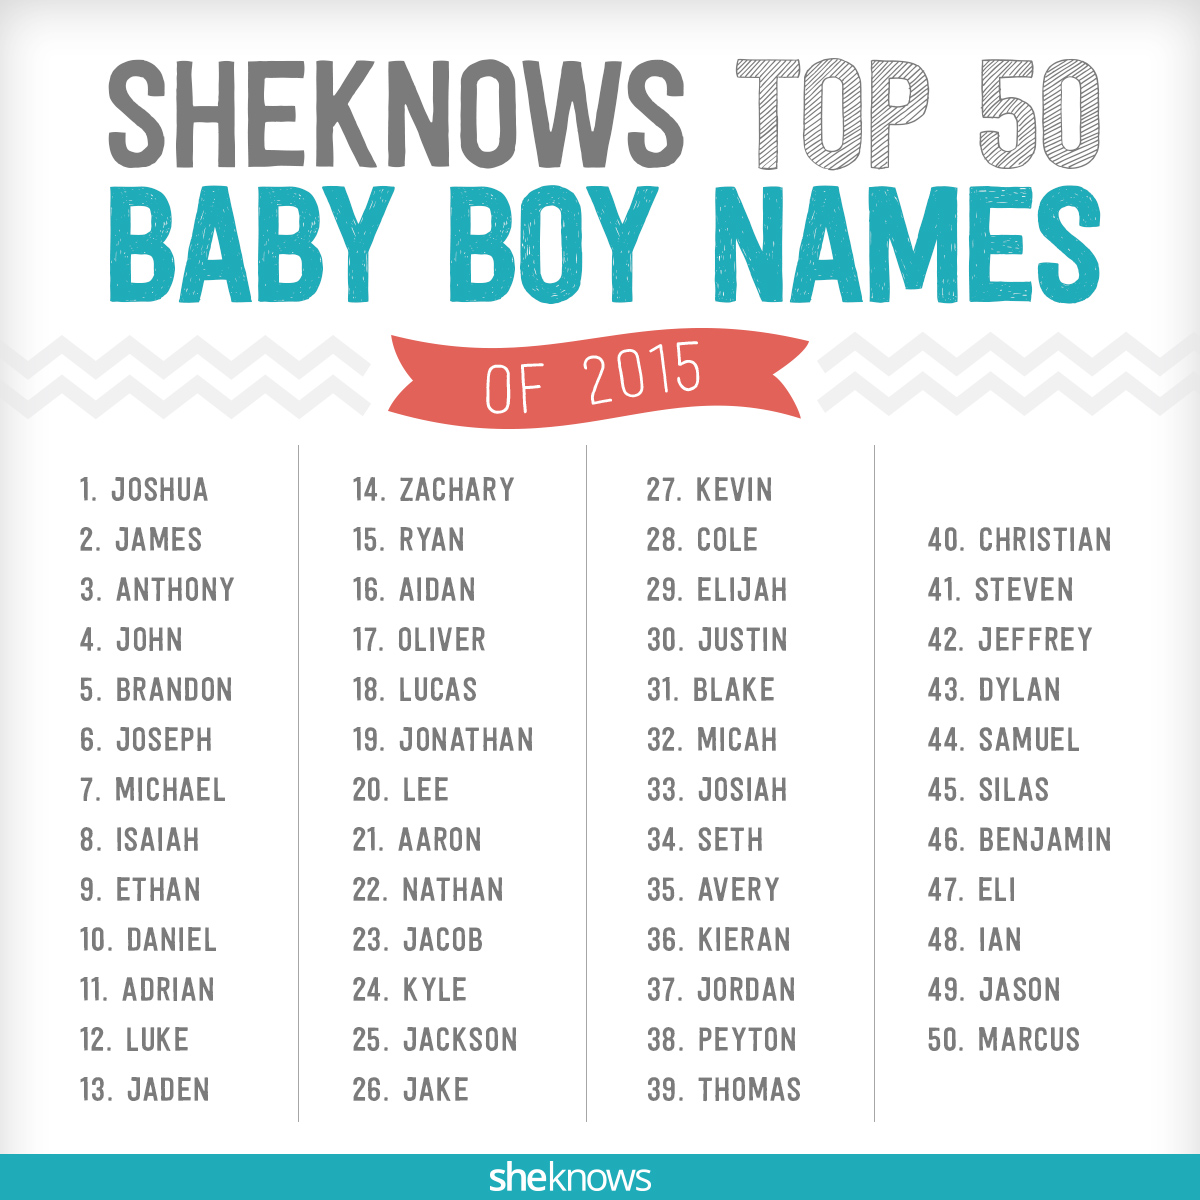 Biblical baby name takes top spot in SheKnows's hot boy names list